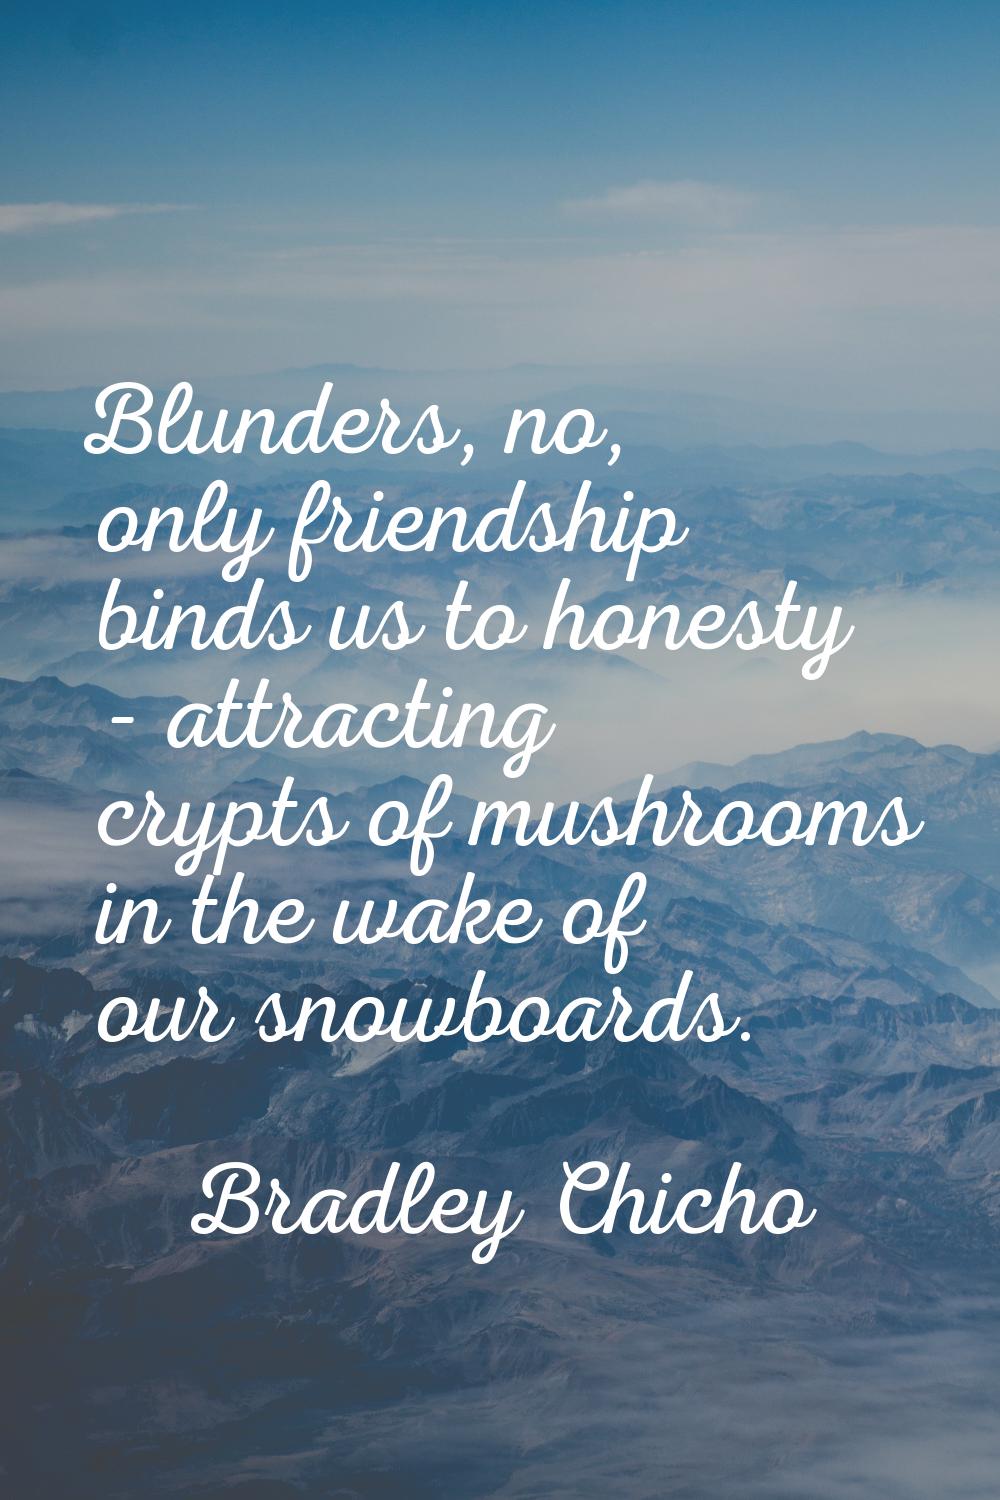 Blunders, no, only friendship binds us to honesty - attracting crypts of mushrooms in the wake of o